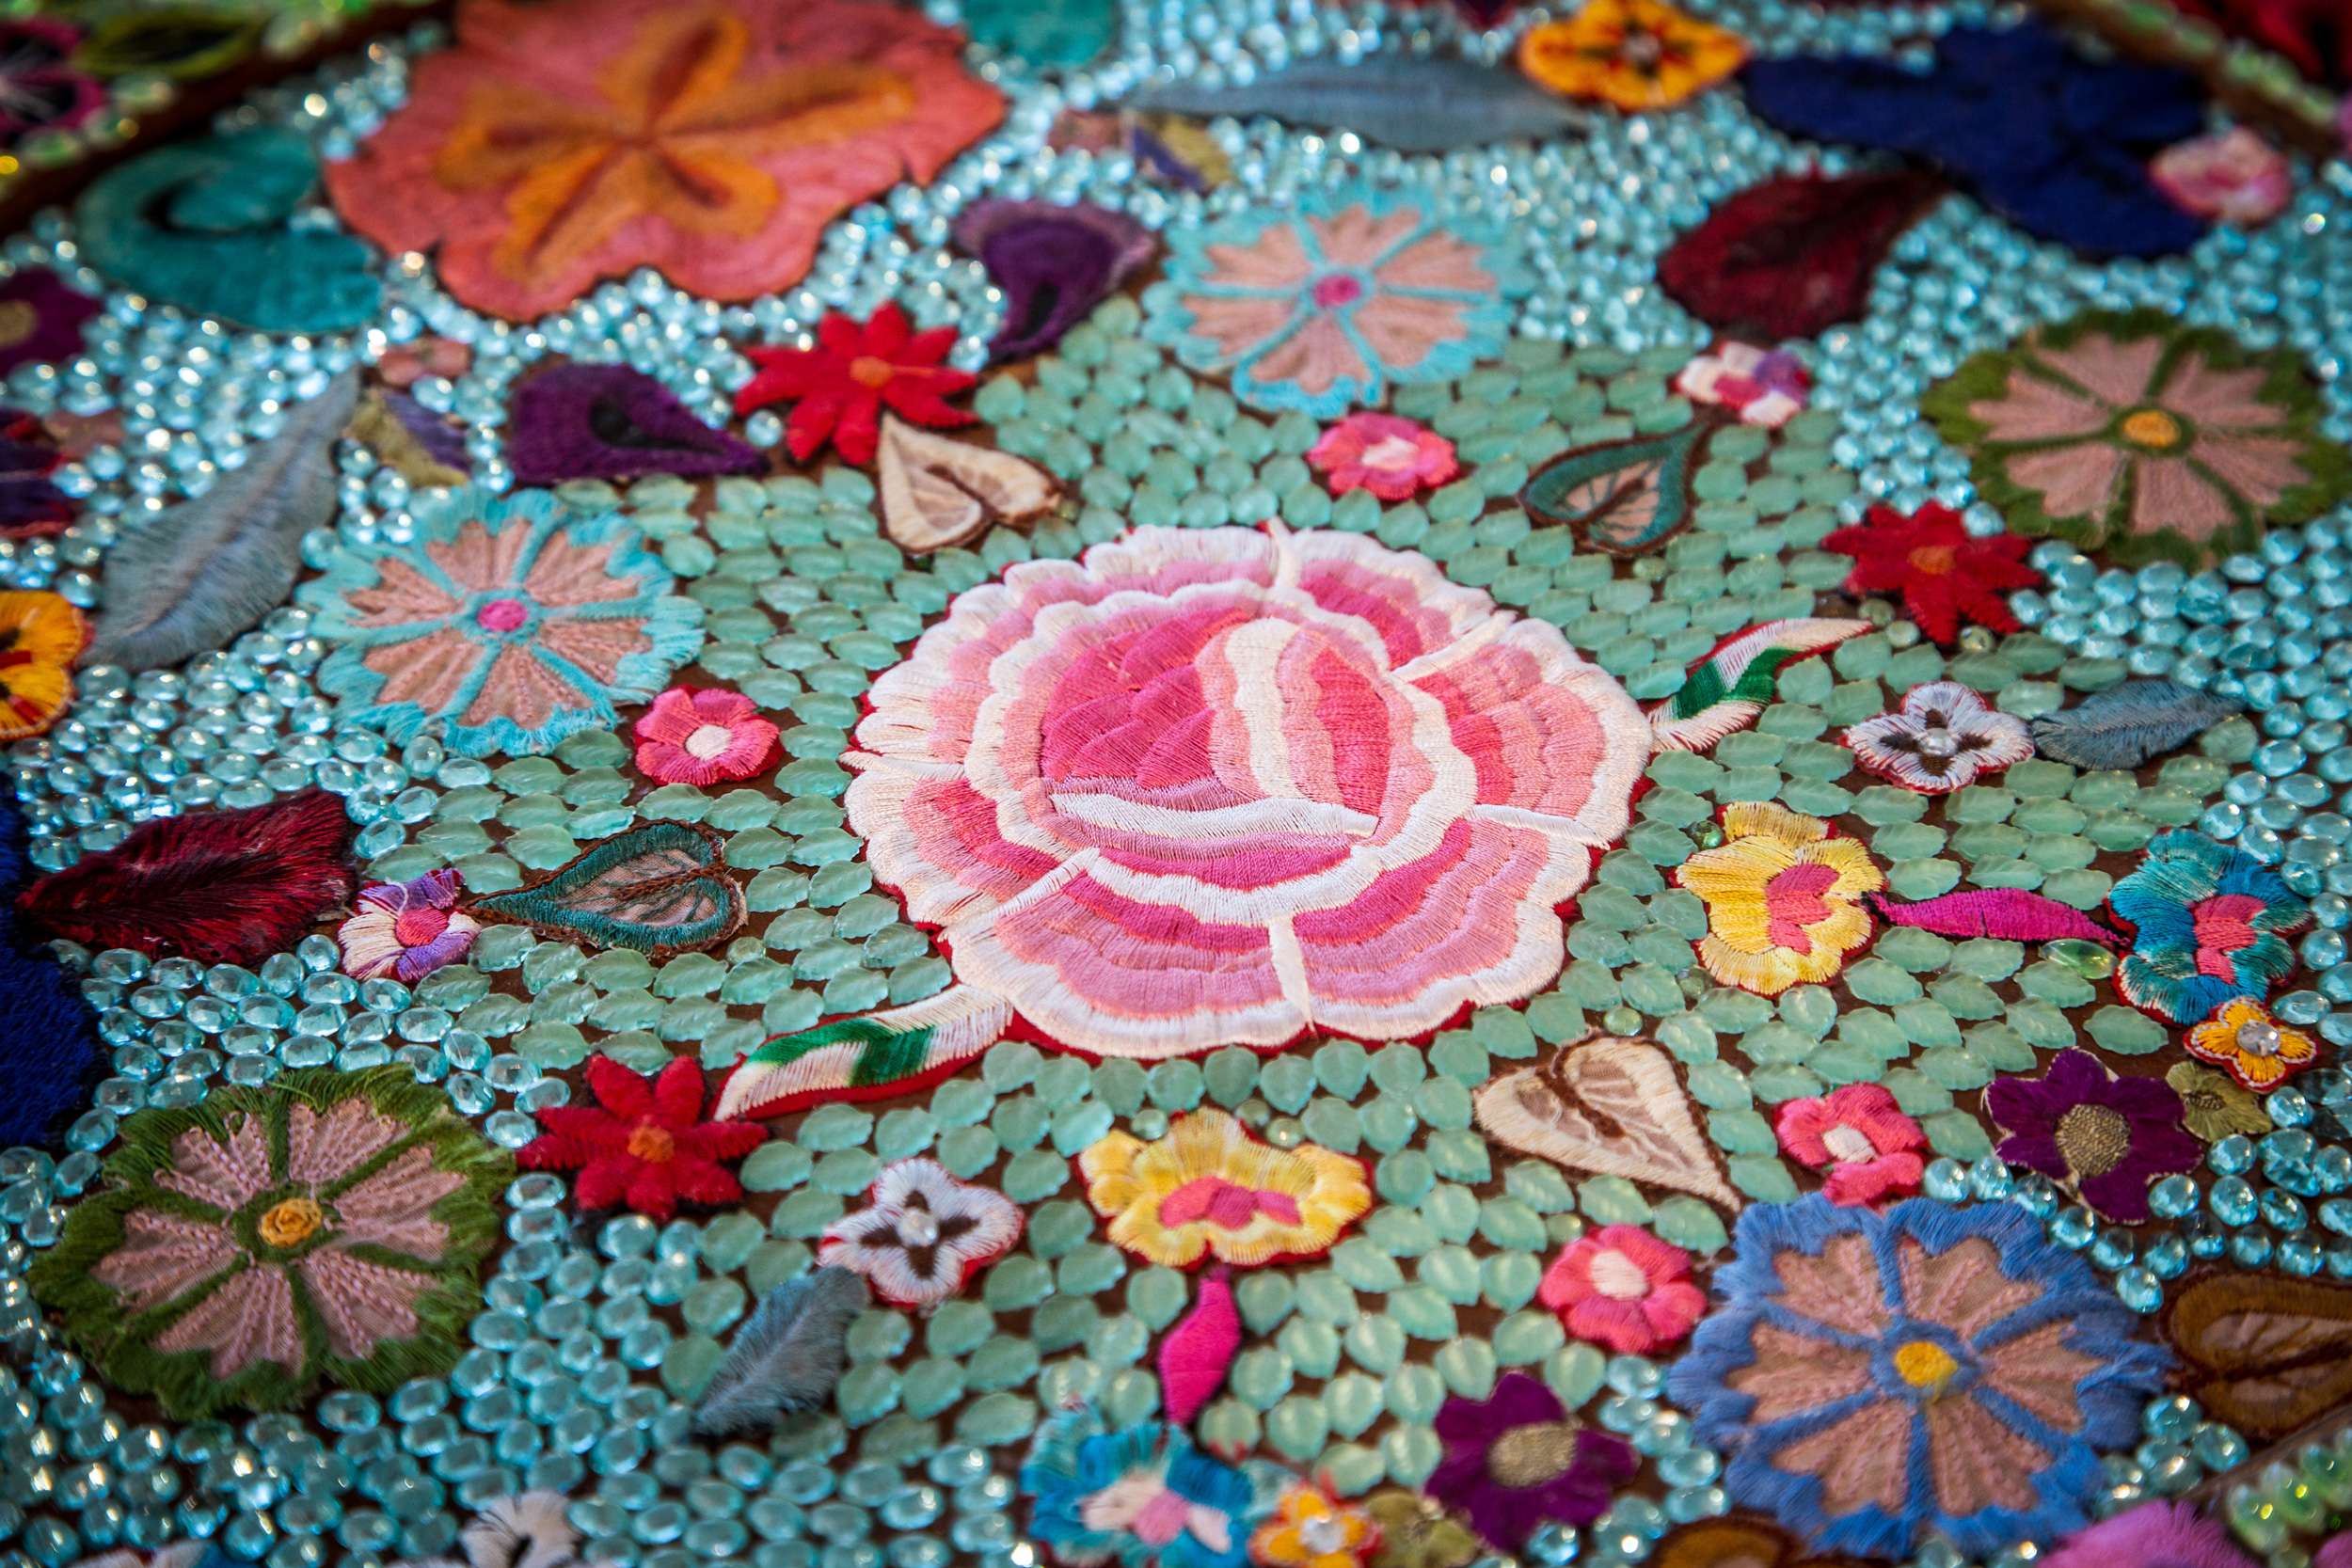 up close photo of sewing and bead work